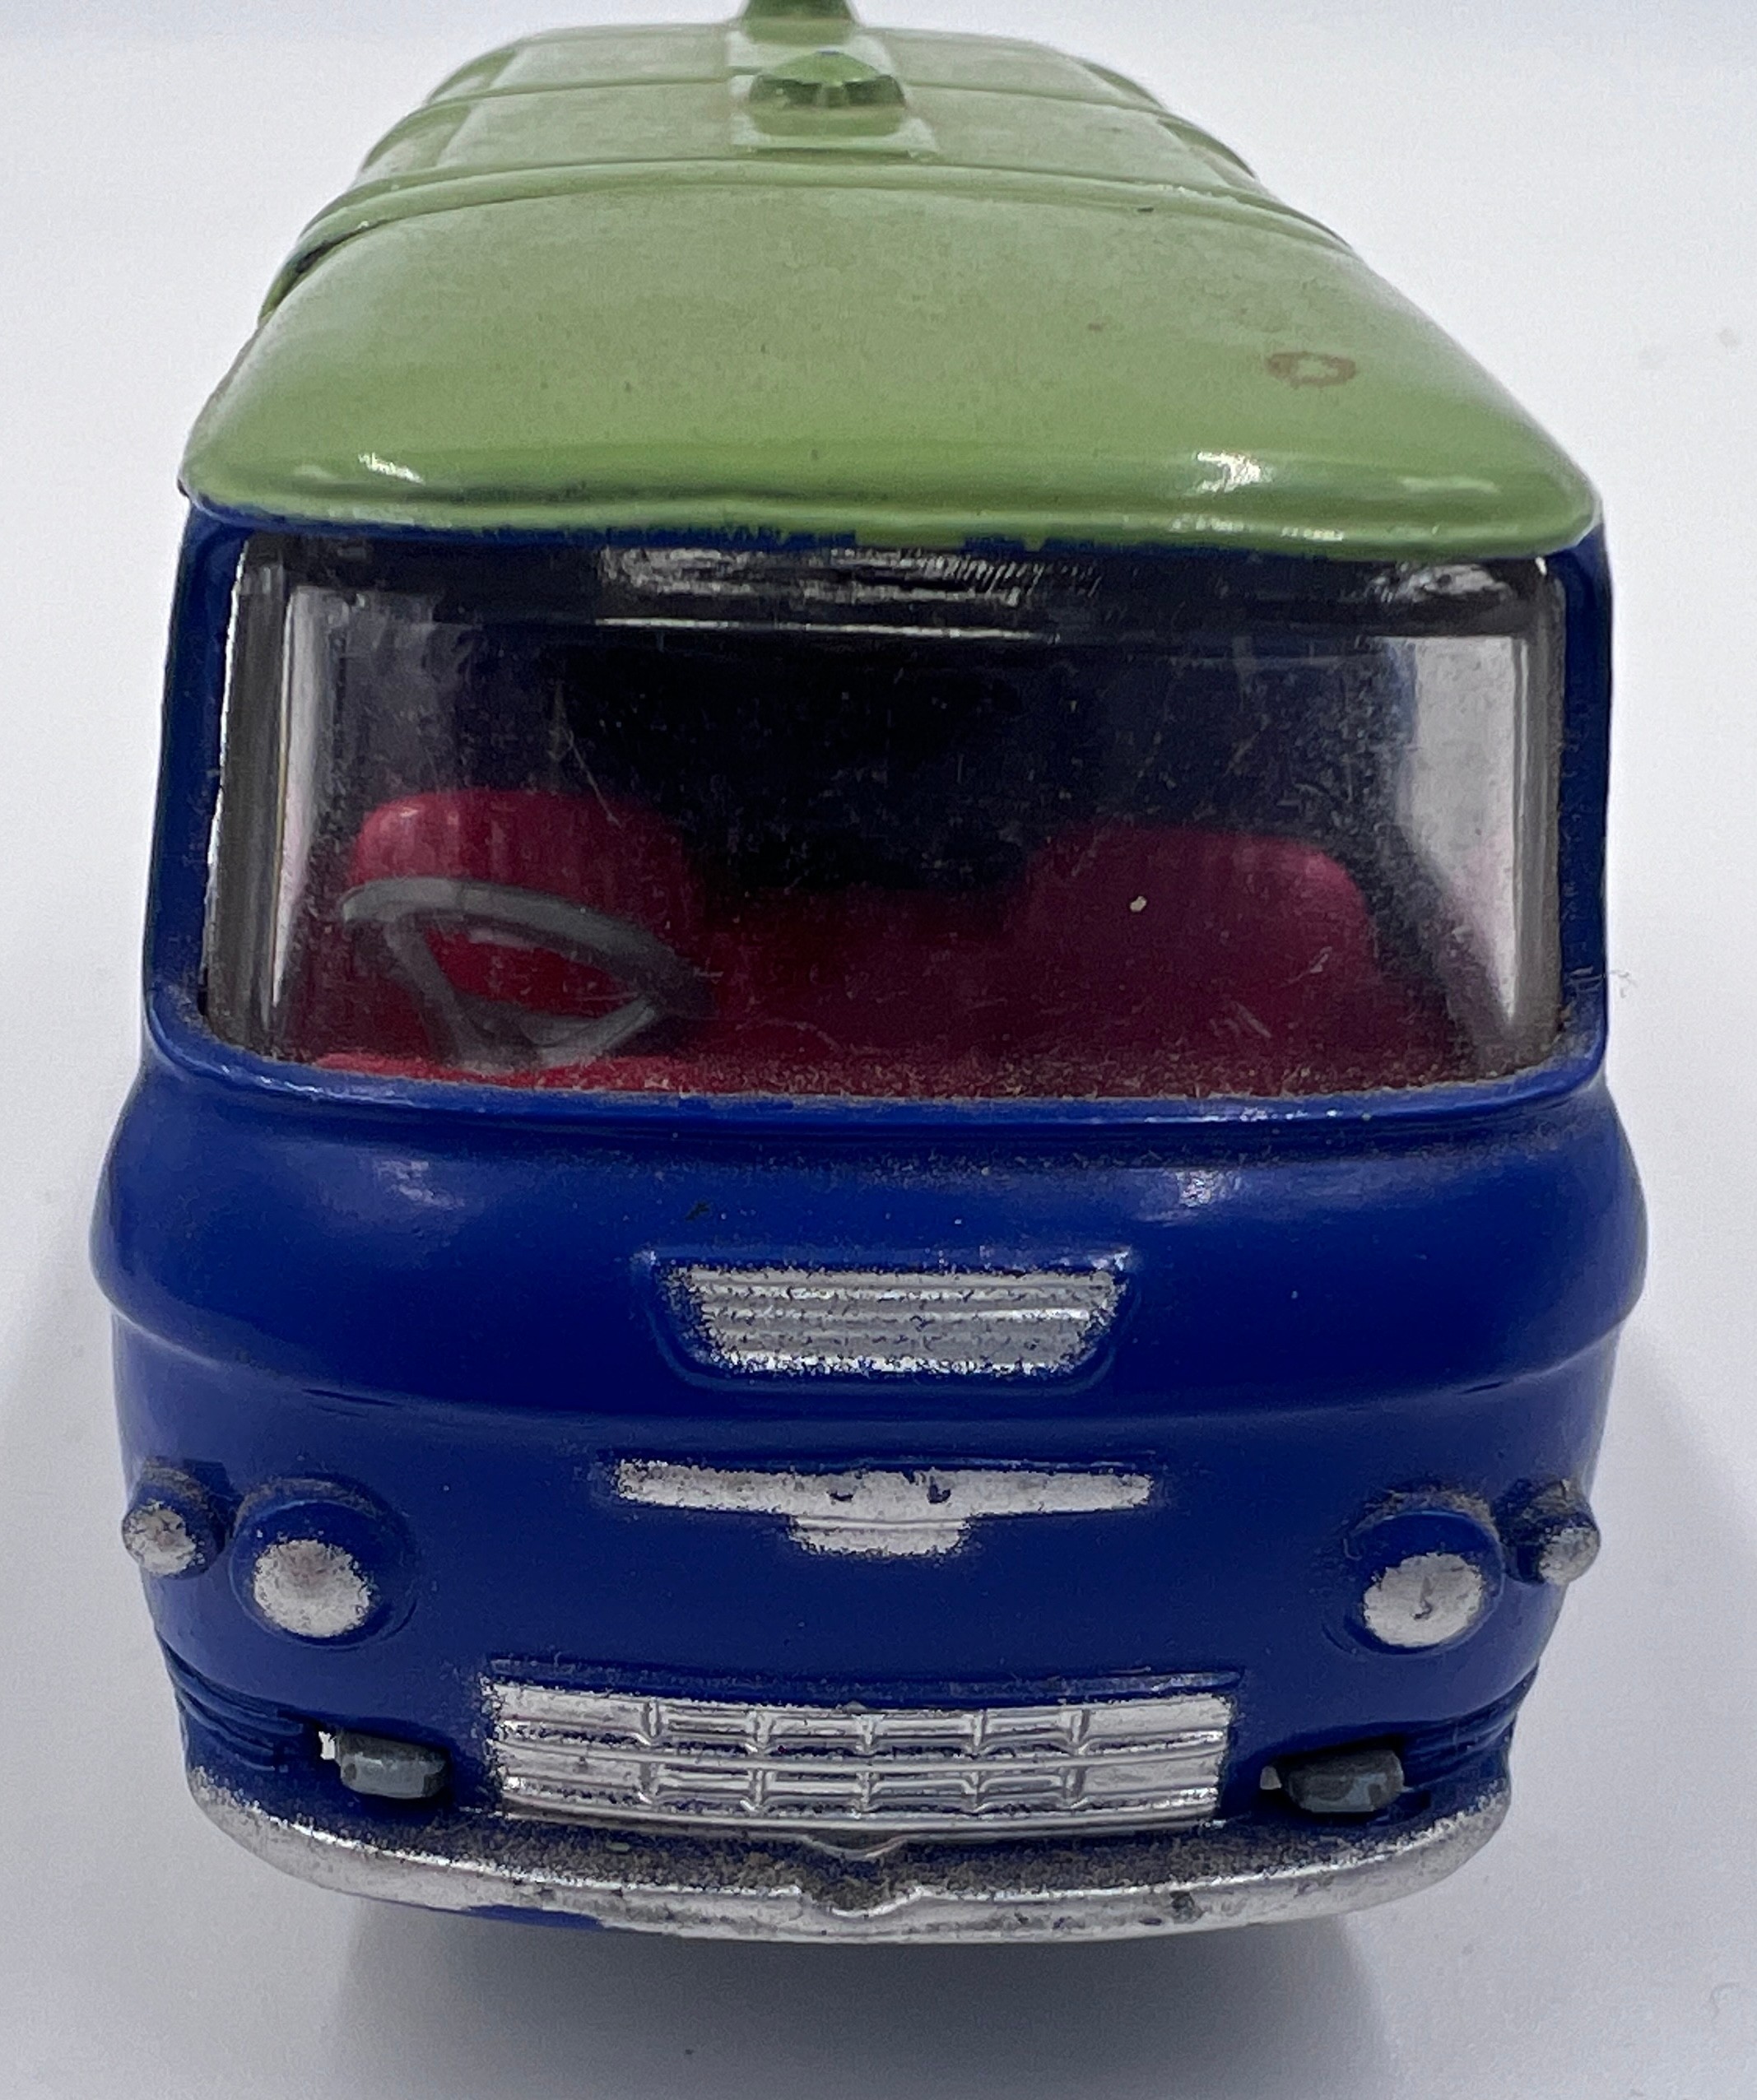 Corgi 462 Commer "Hammonds" Promotional Van in original box - finished in blue with a green roof, - Bild 5 aus 10